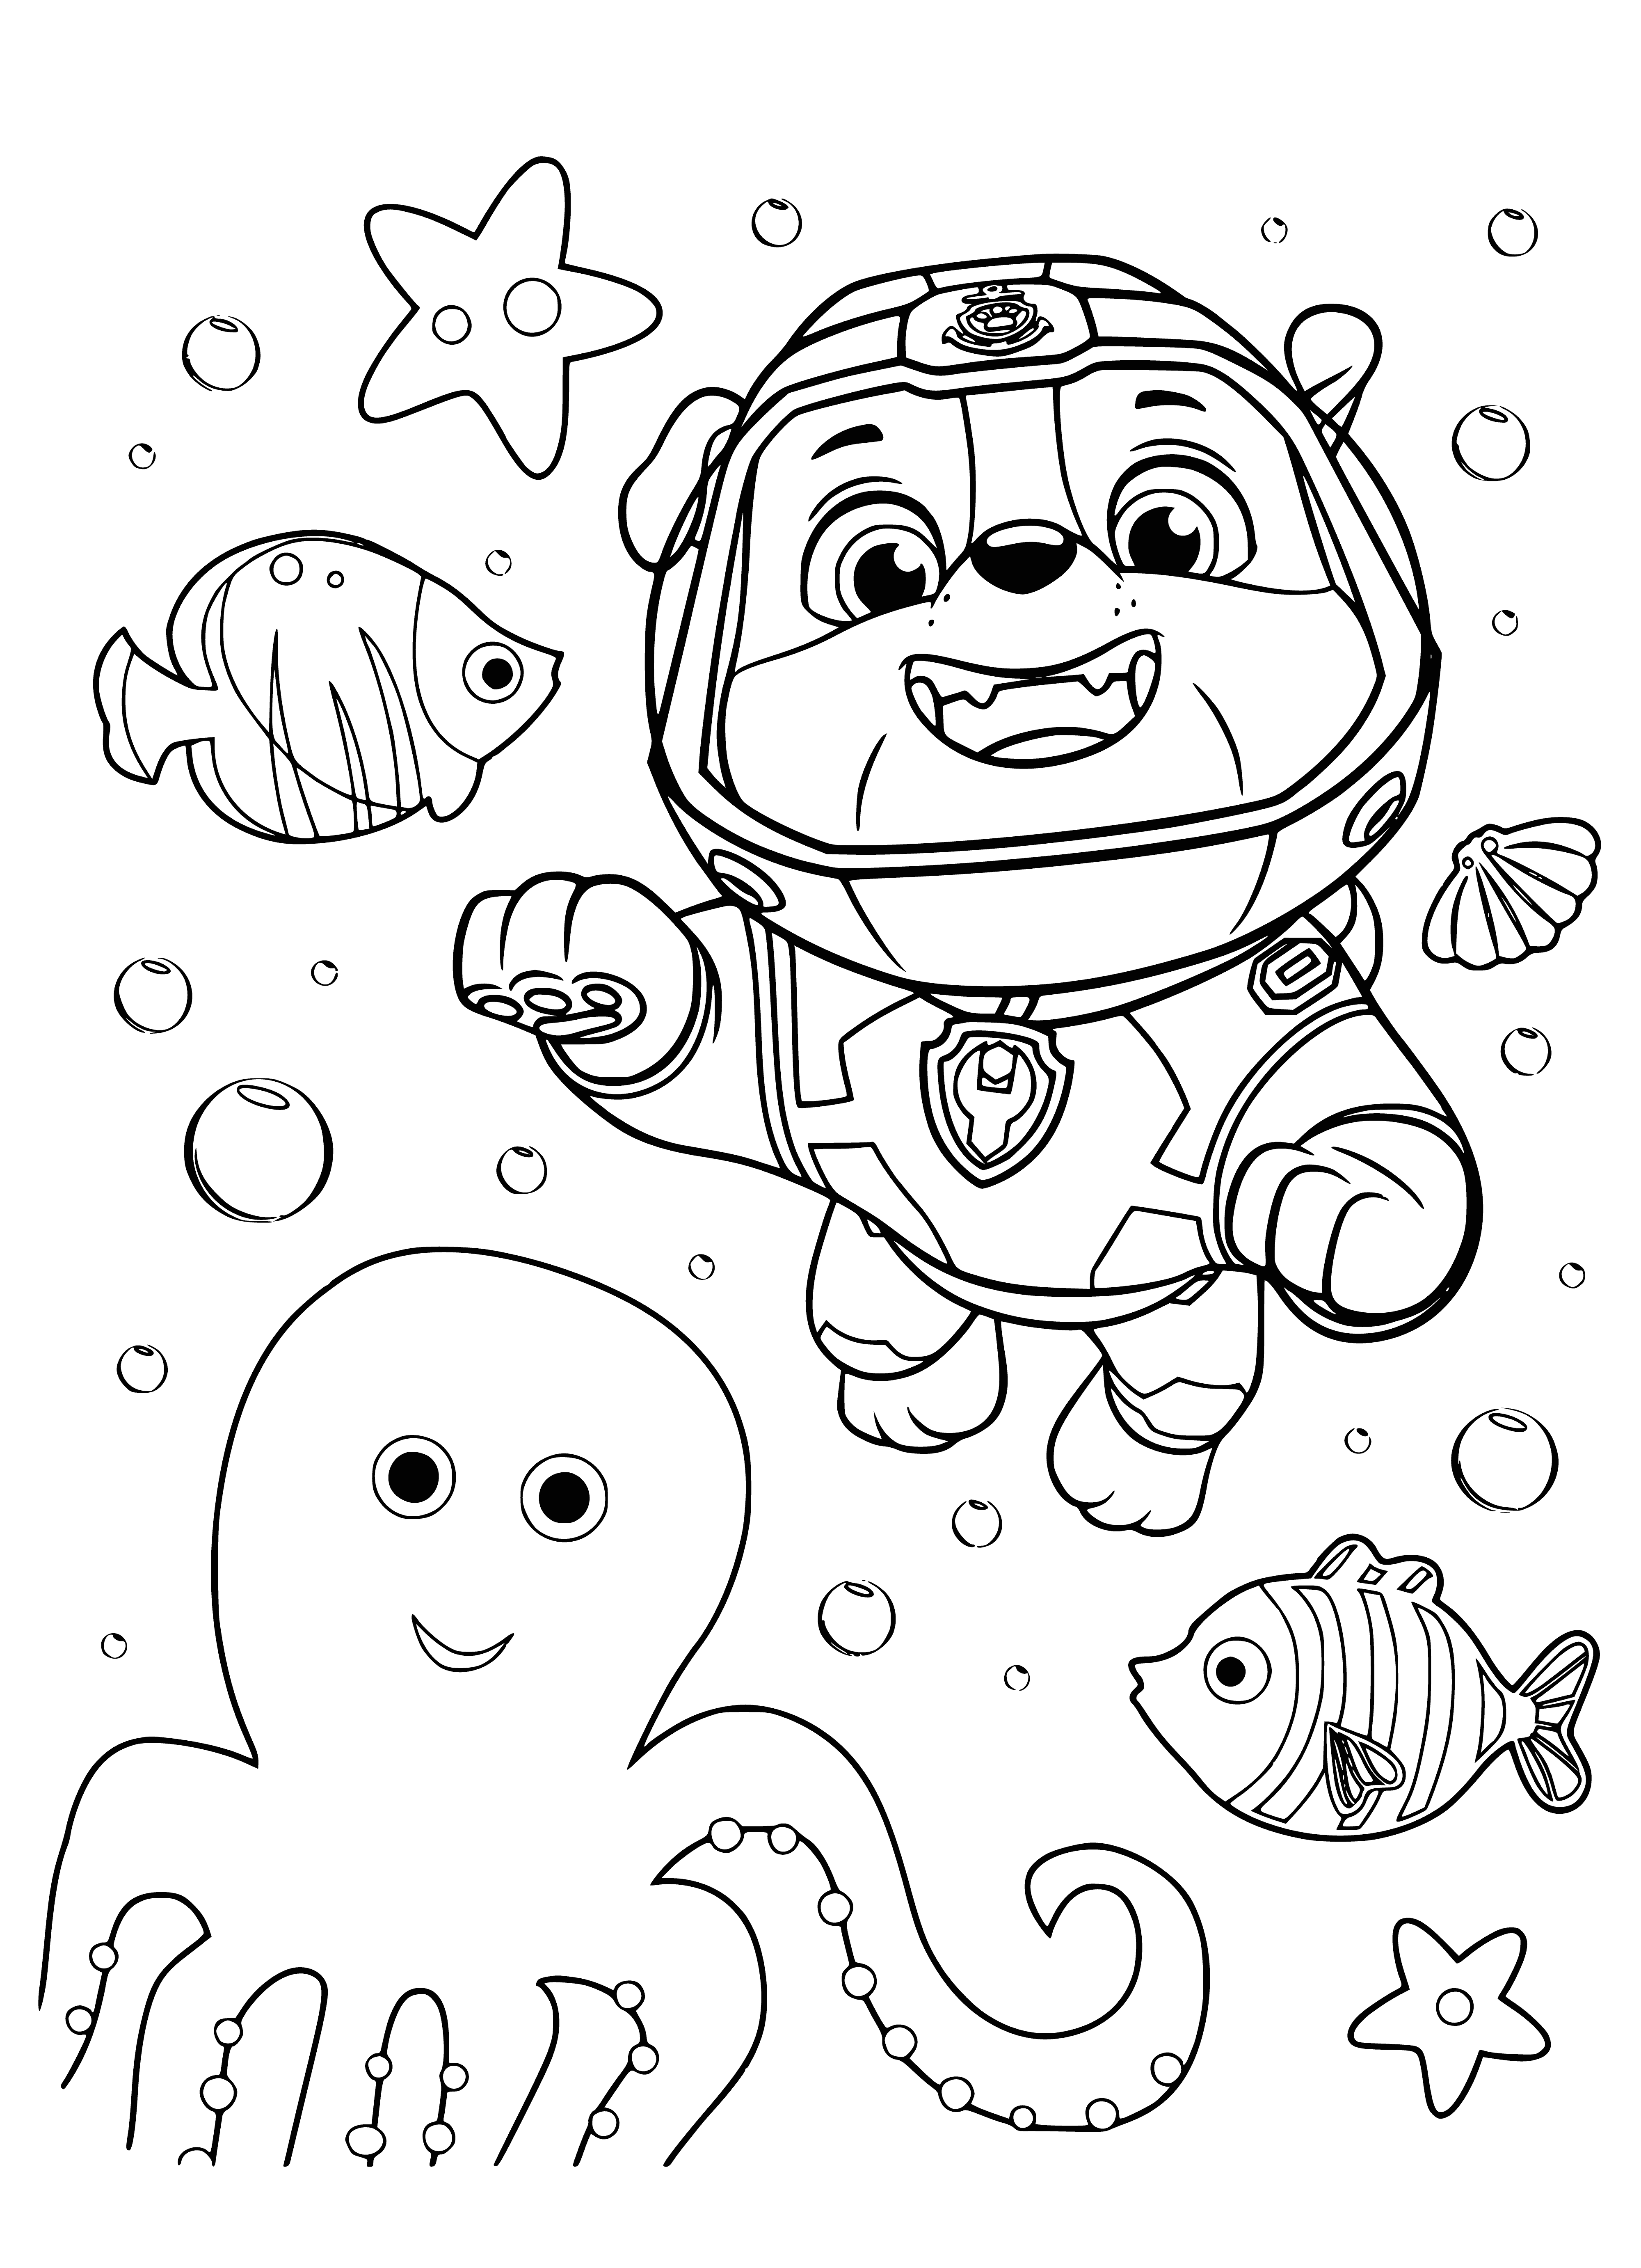 coloring page: Friends on the fire truck help put out fires. Three PAW Patrol pups wear red, yellow and blue uniforms. They're ready to save Adventure Bay!